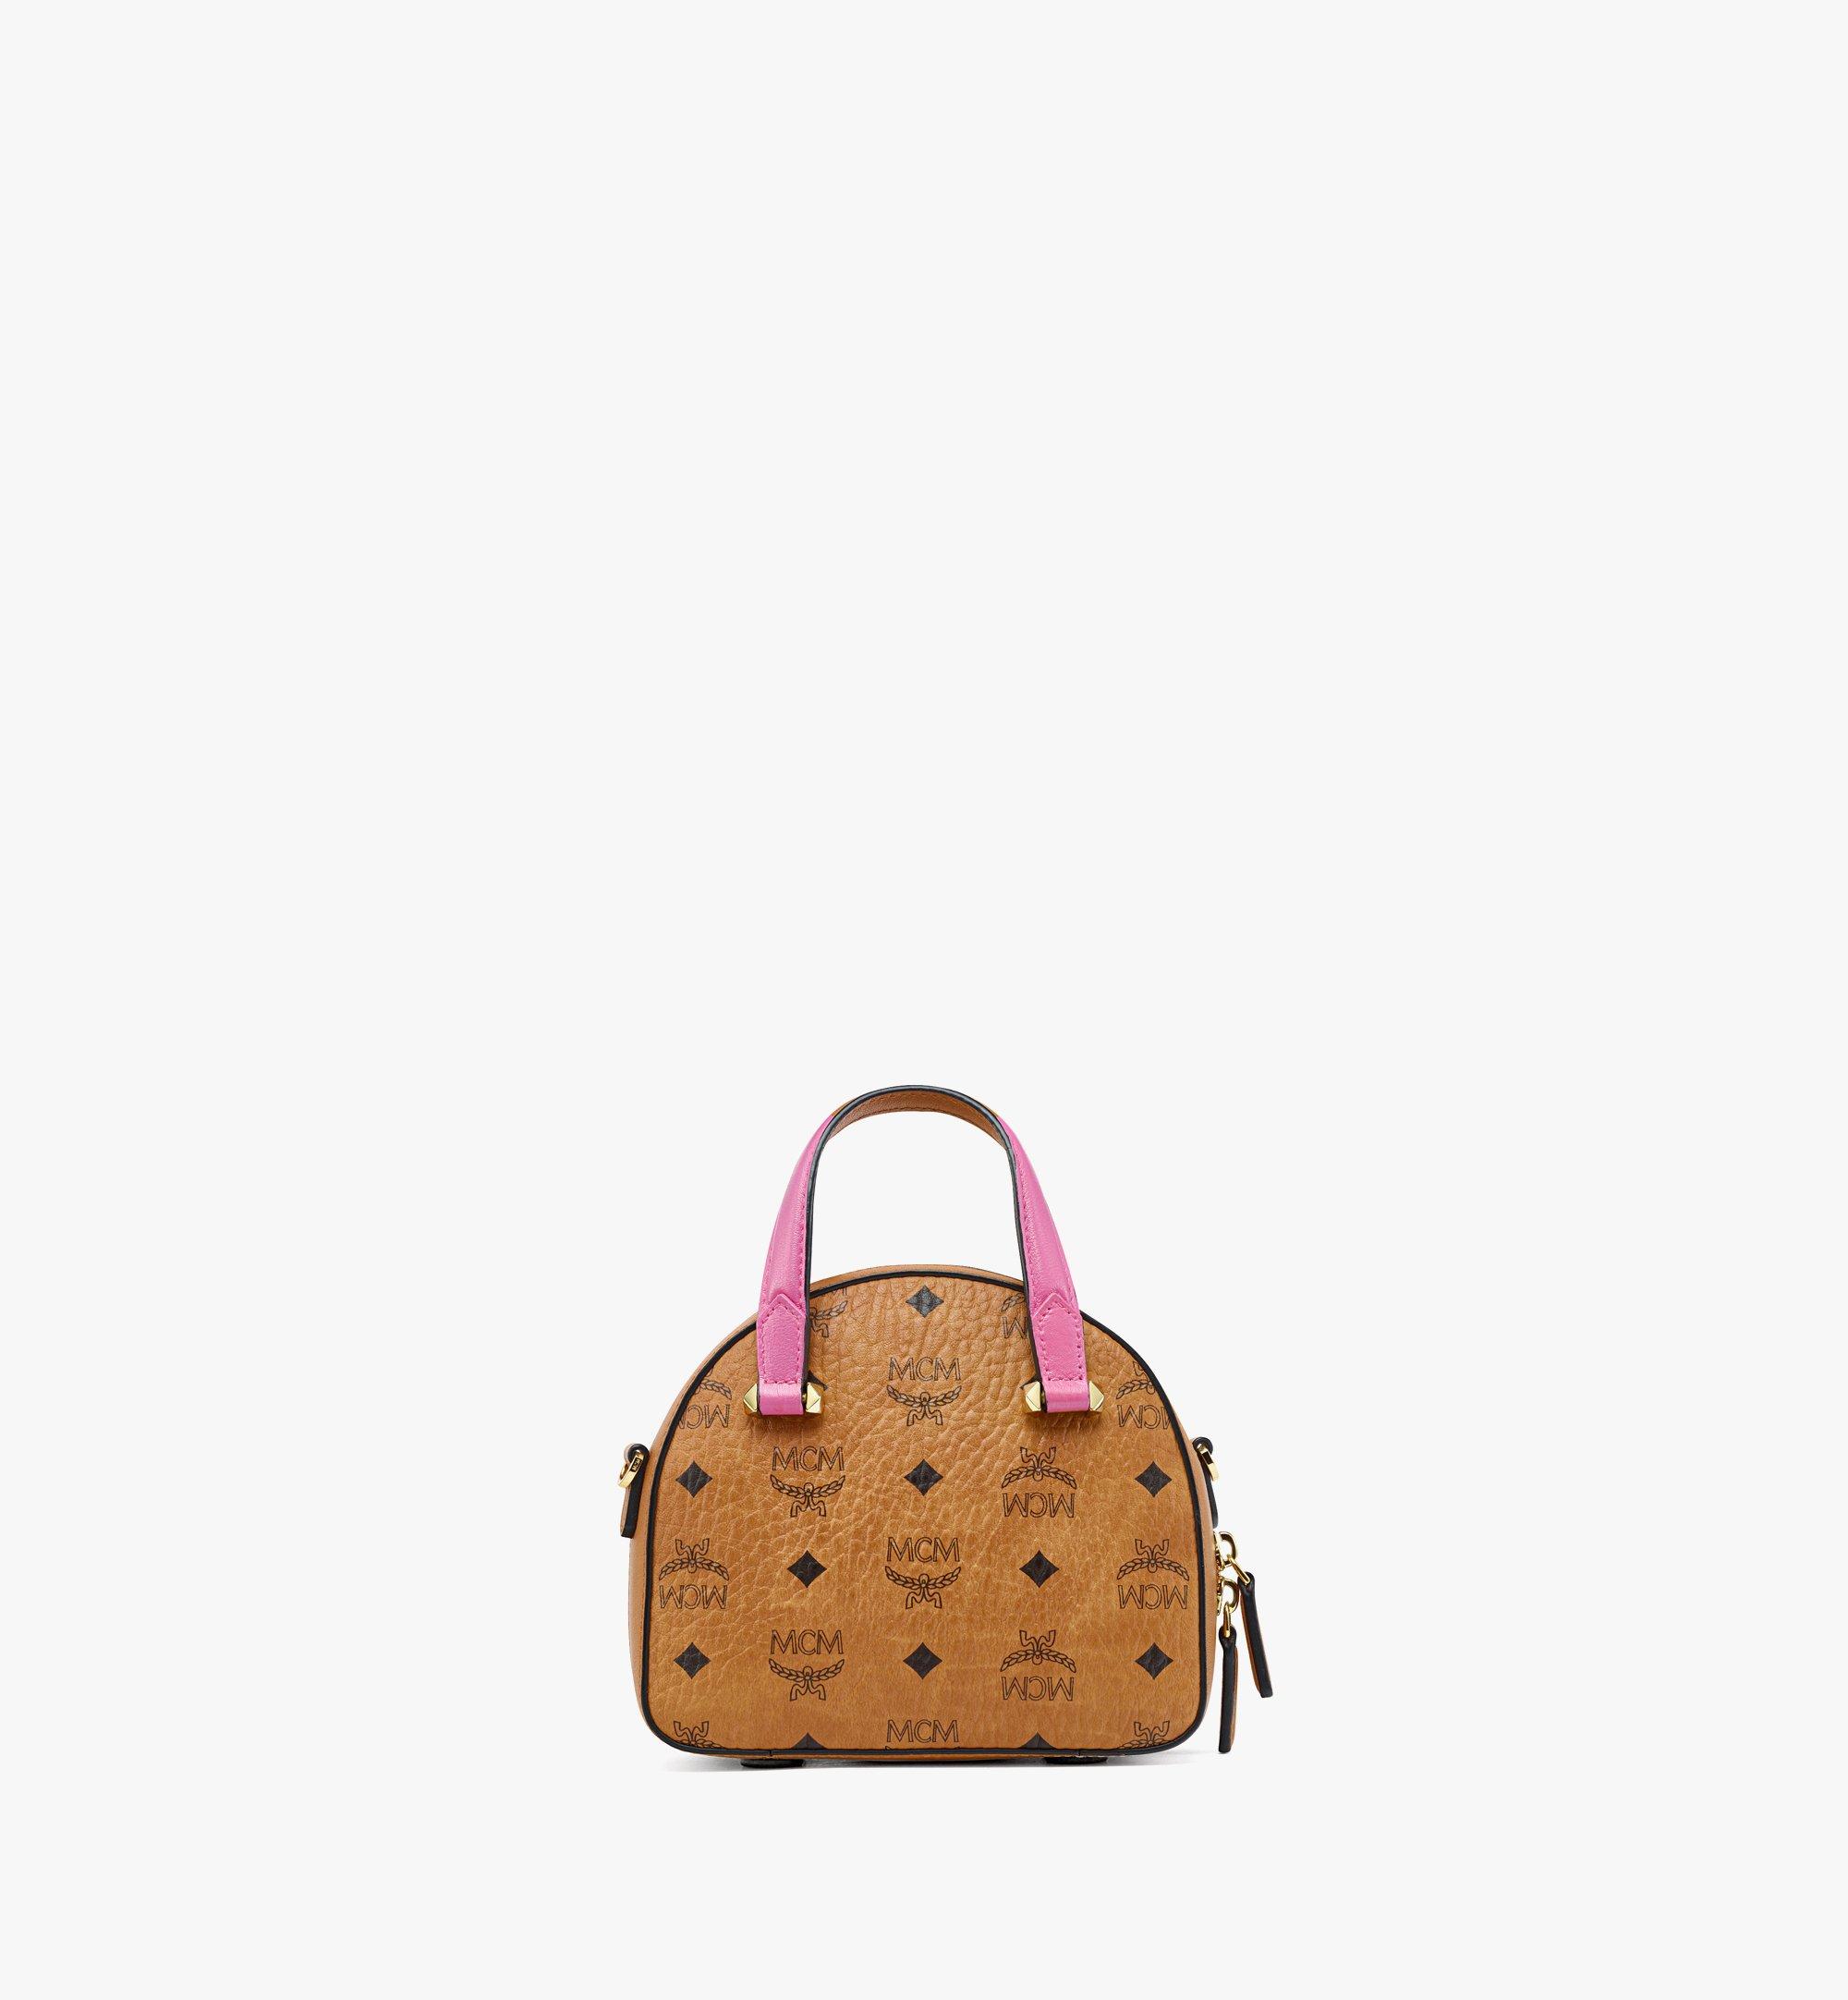 MCM Fun & Joy Upcycling Project Half Moon Tote in Studded Visetos Cognac MWTCAUP17CO001 Alternate View 3